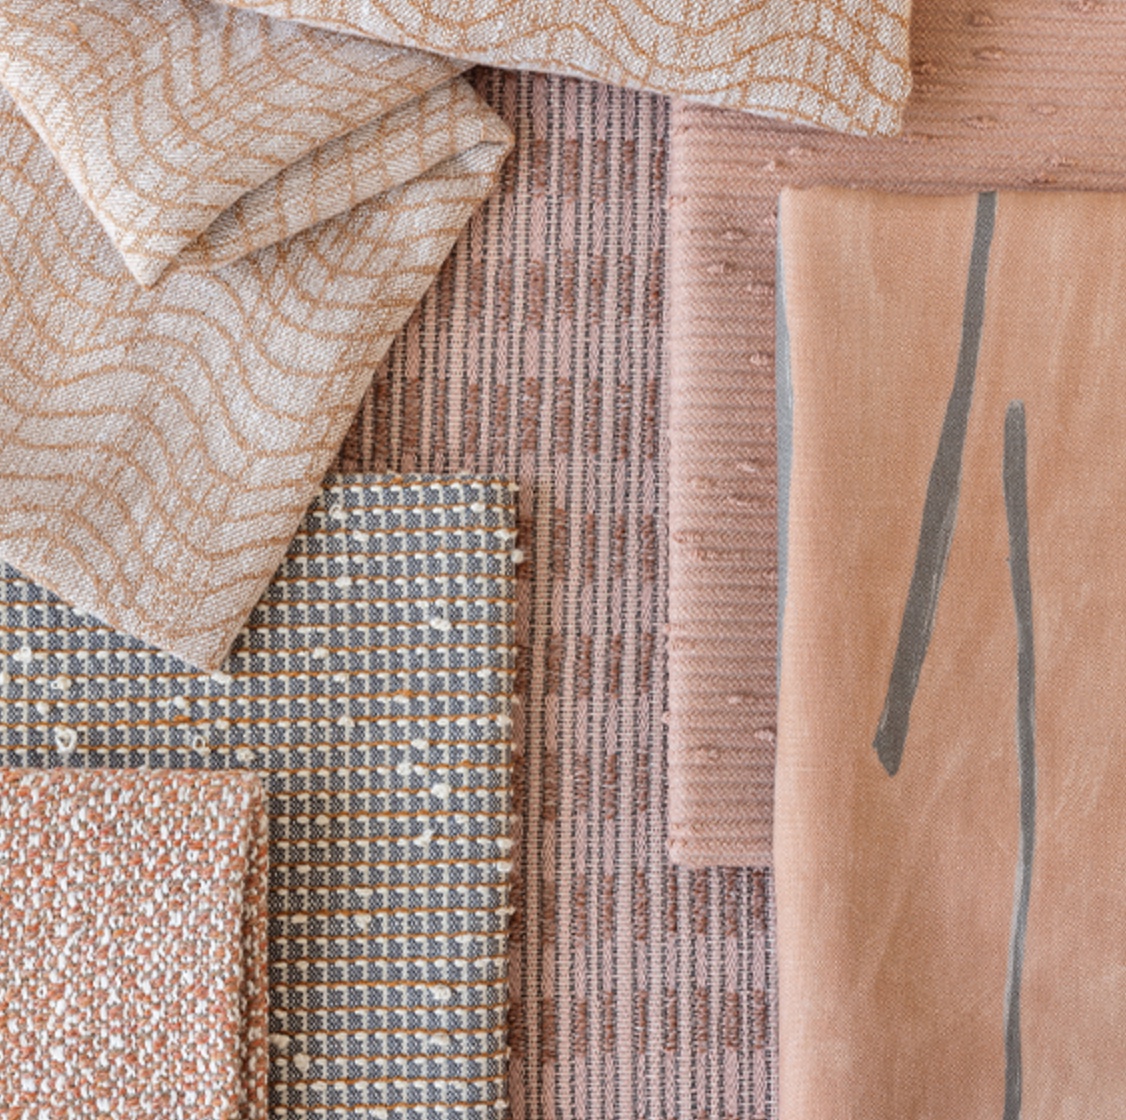 Women Designers: Exciting New Fabrics from Kelly Wearstler